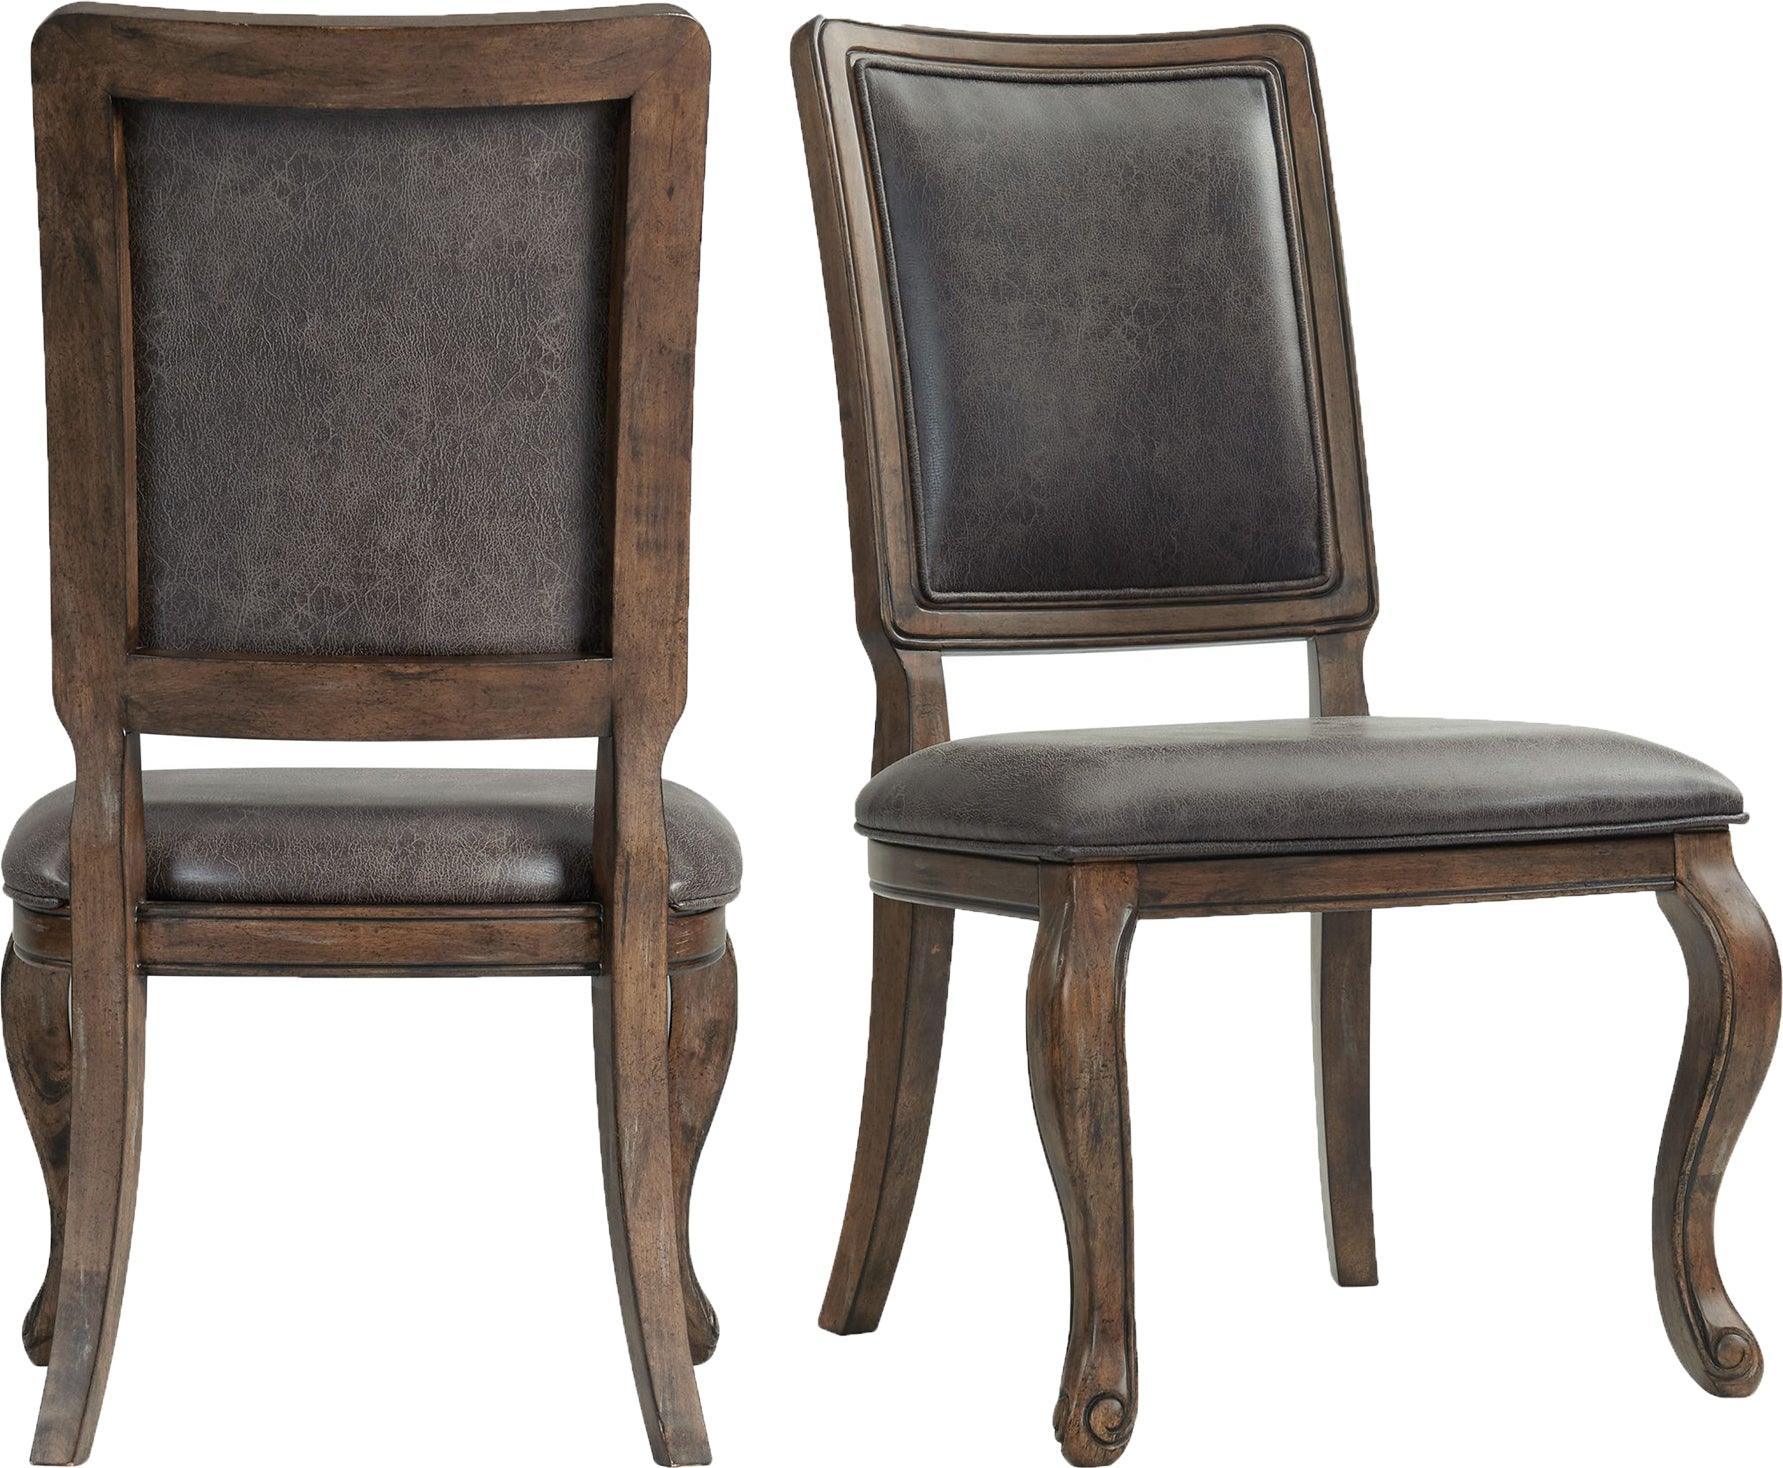 Elements Dining Chairs - Hayward Side Chair Set (Set of 2)